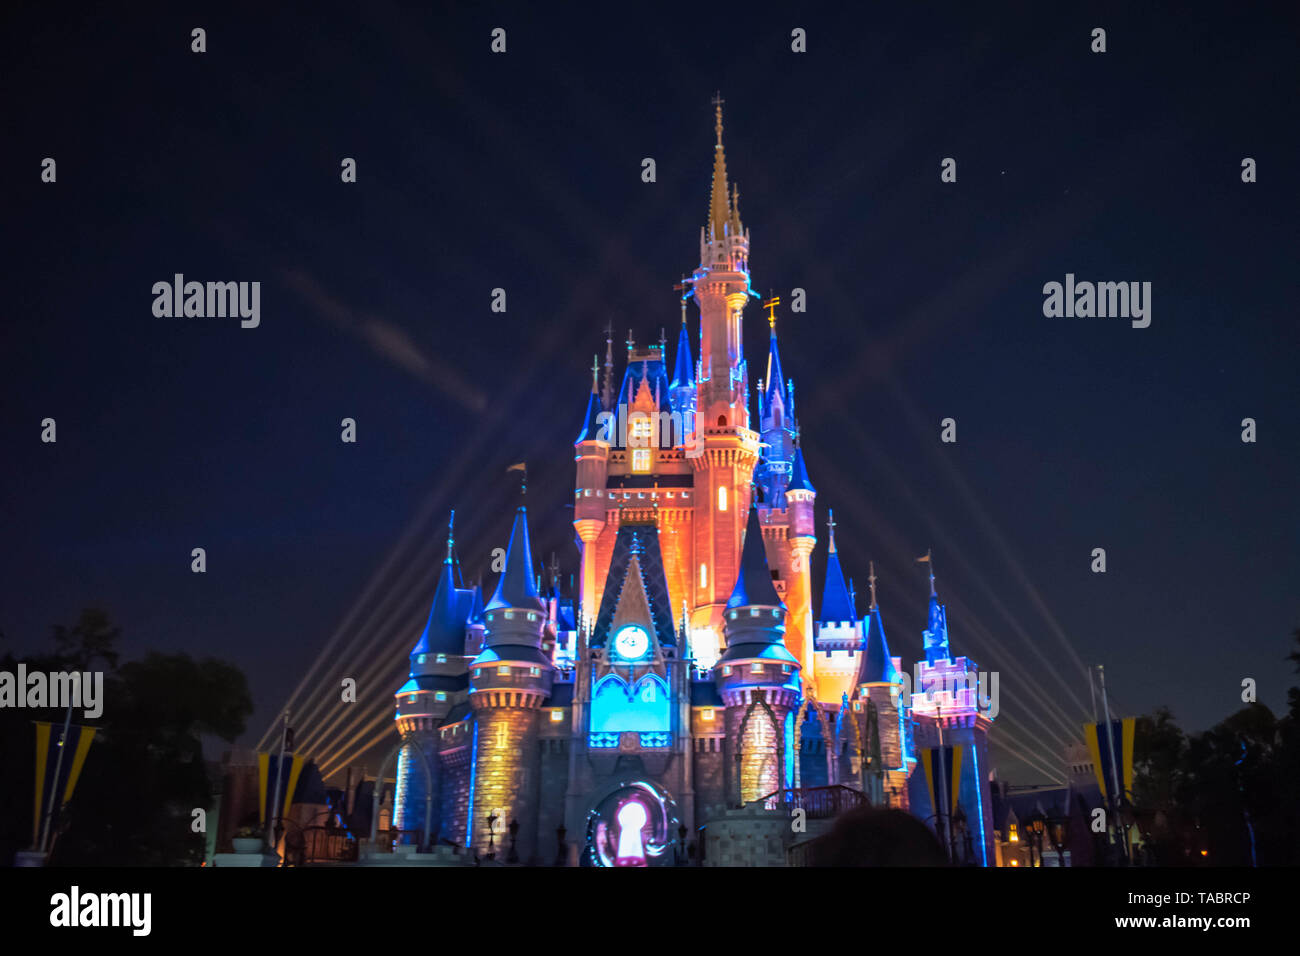 Orlando, Florida. May 10, 2019. Happily Ever After is Spectacular fireworks show at Cinderella's Castle on dark night background in Magic Kingdom  (7) Stock Photo